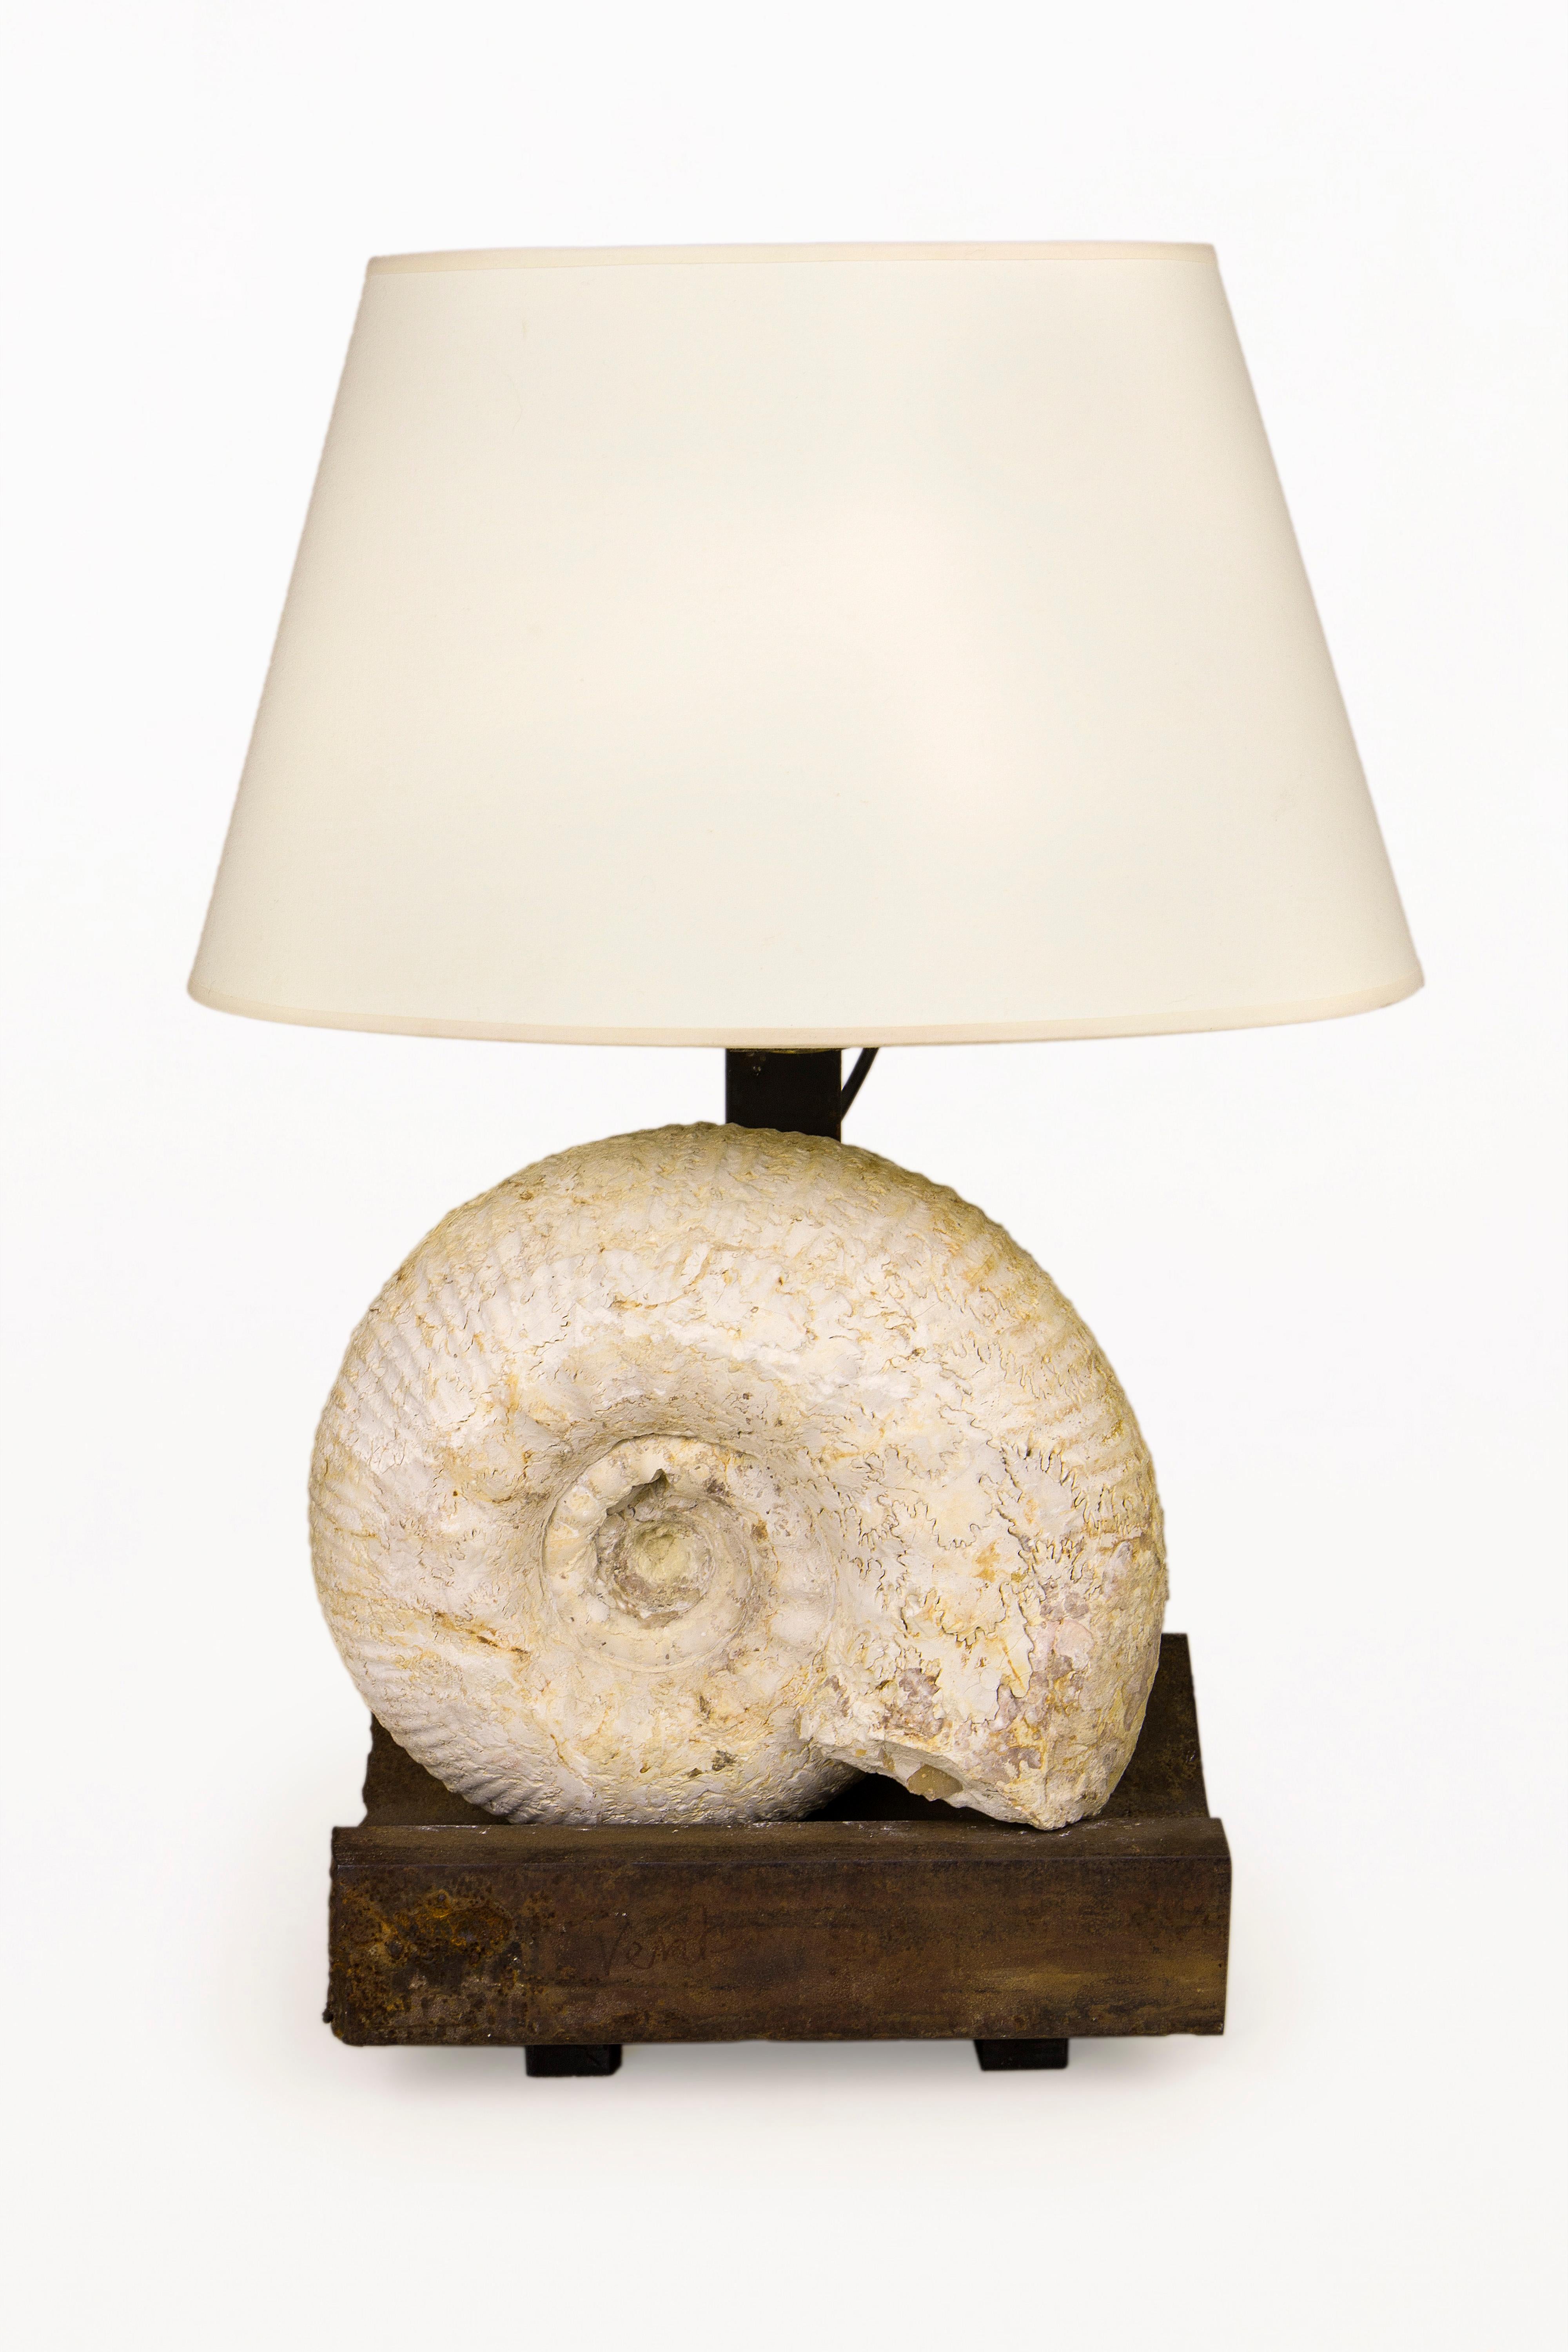 Pair of Jean-Charles Moreux table lamps
Fossil Table lamps with metal base,
circa 1940, France.
Very good vintage condition.
French designer Jean-Charles Moreux was one of the best designers working in the 1930s. He often used fossils in his